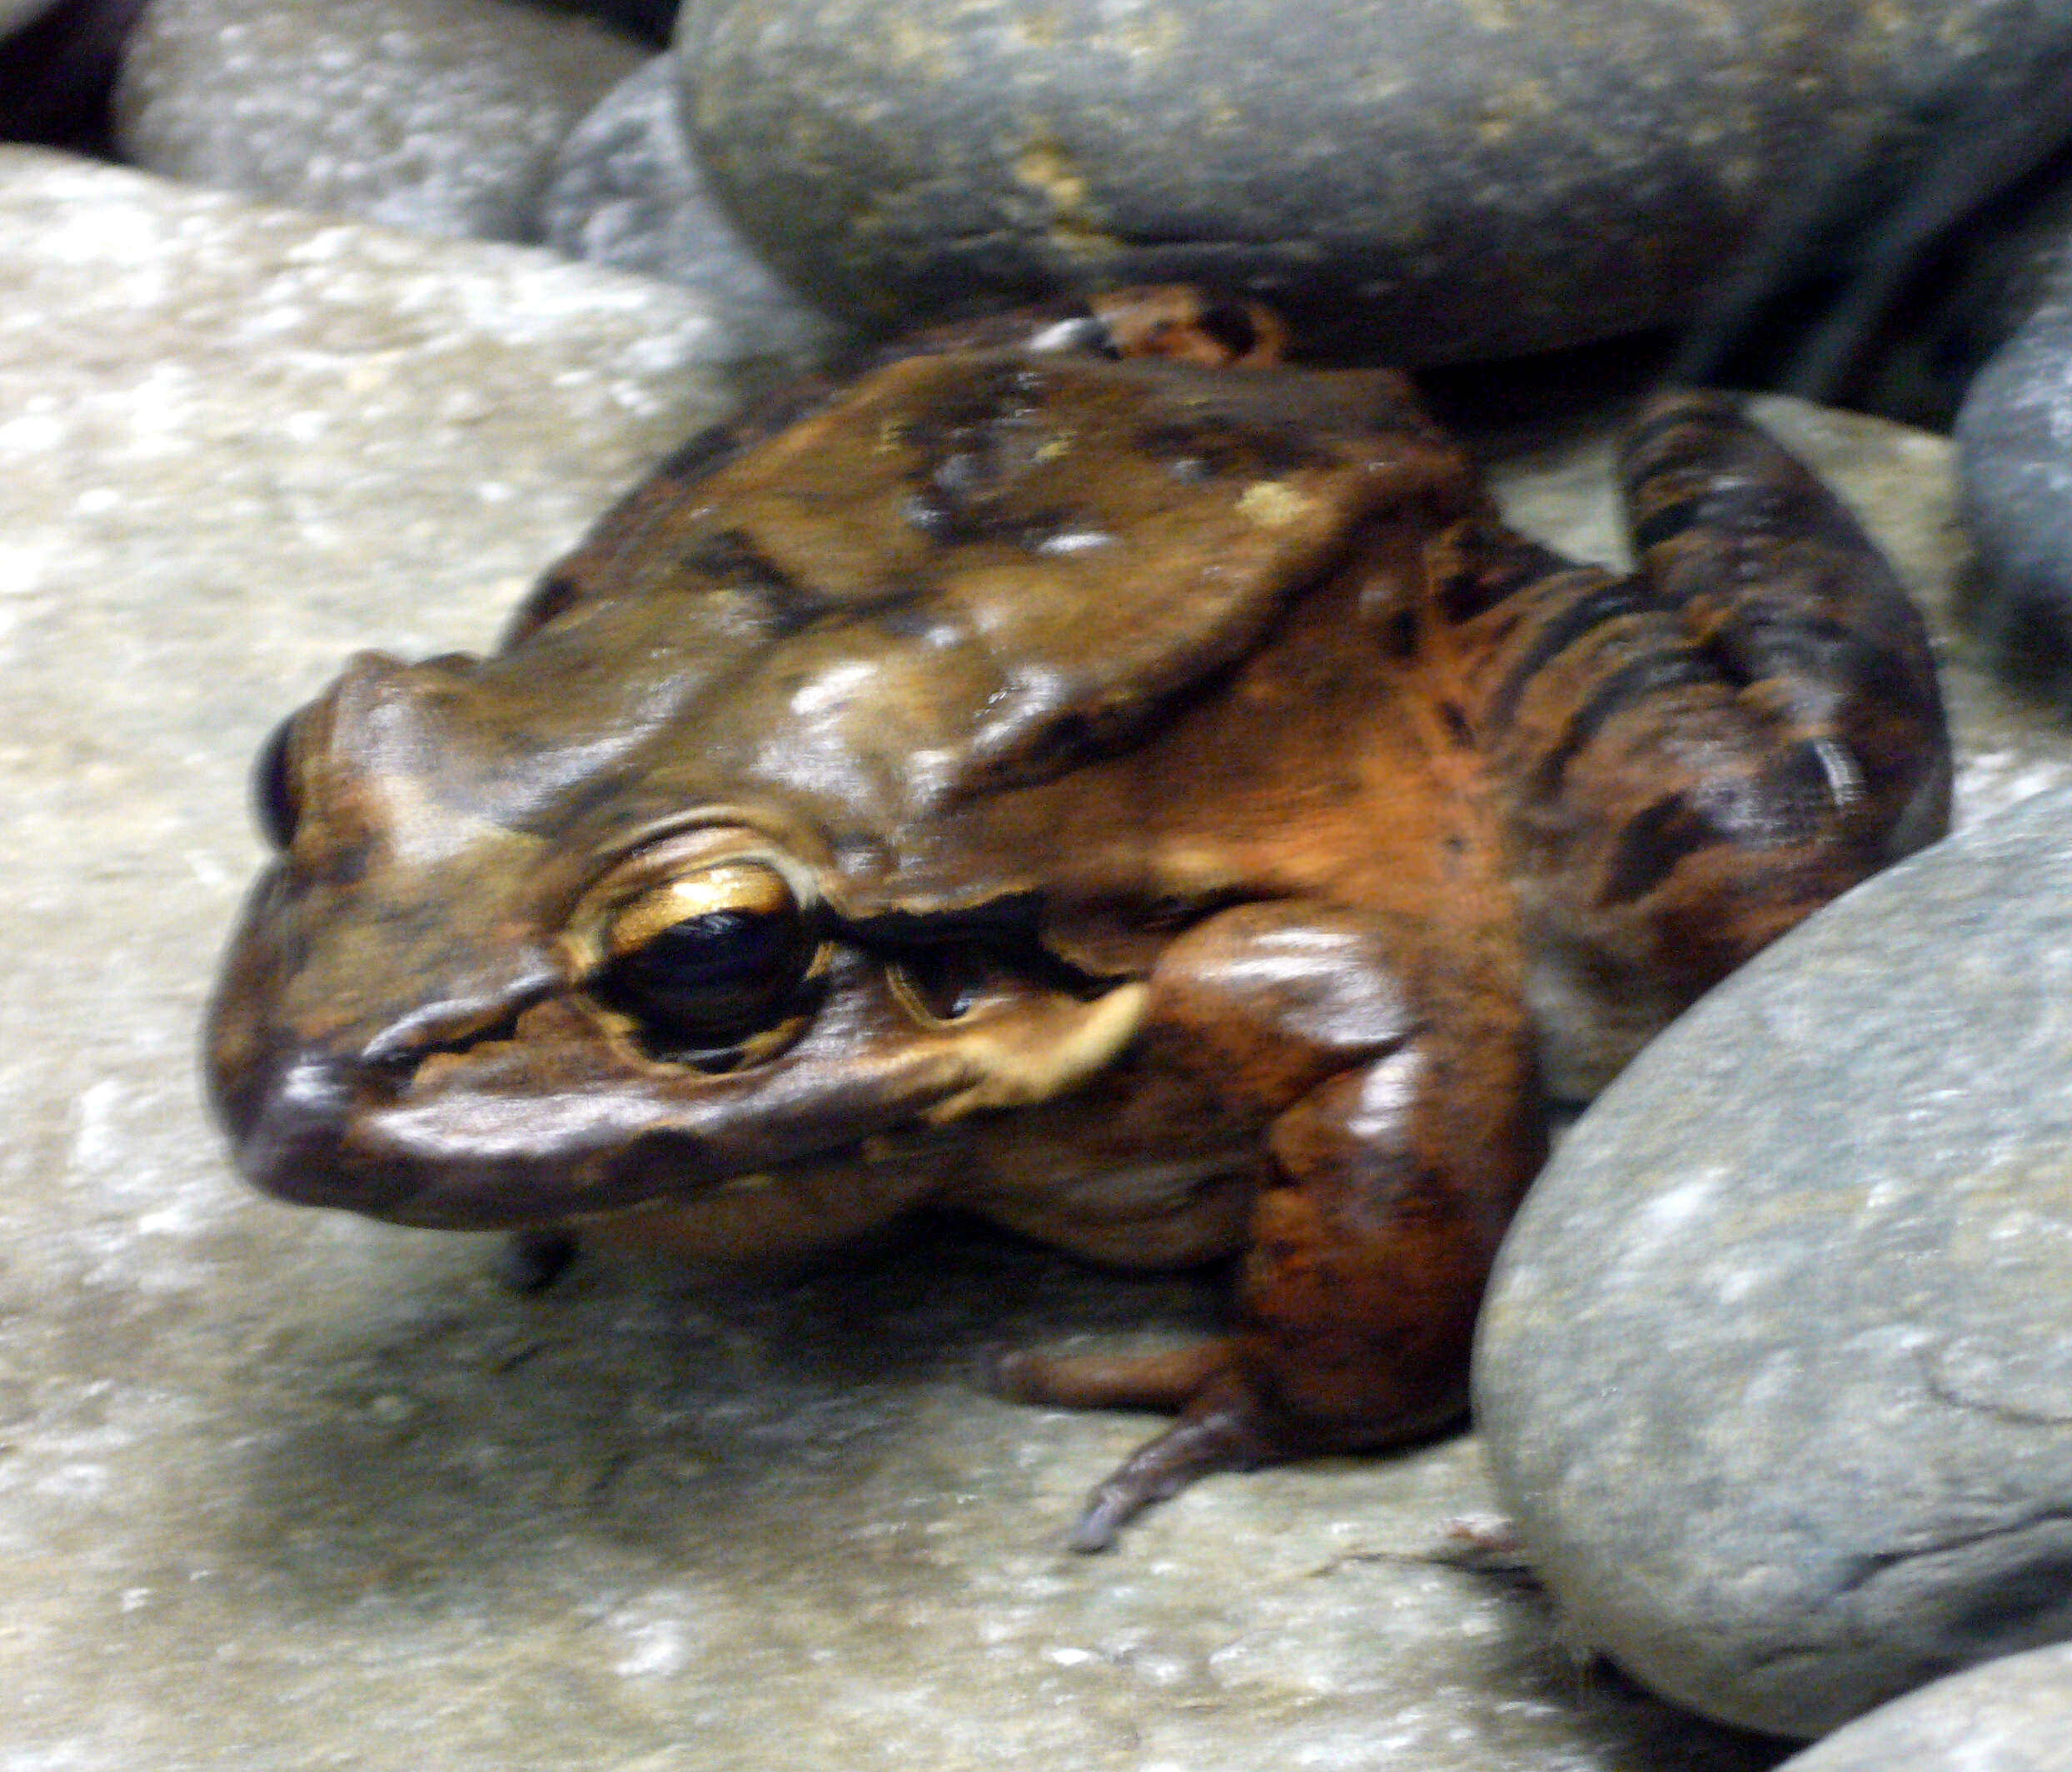 Image of Giant Ditch Frog